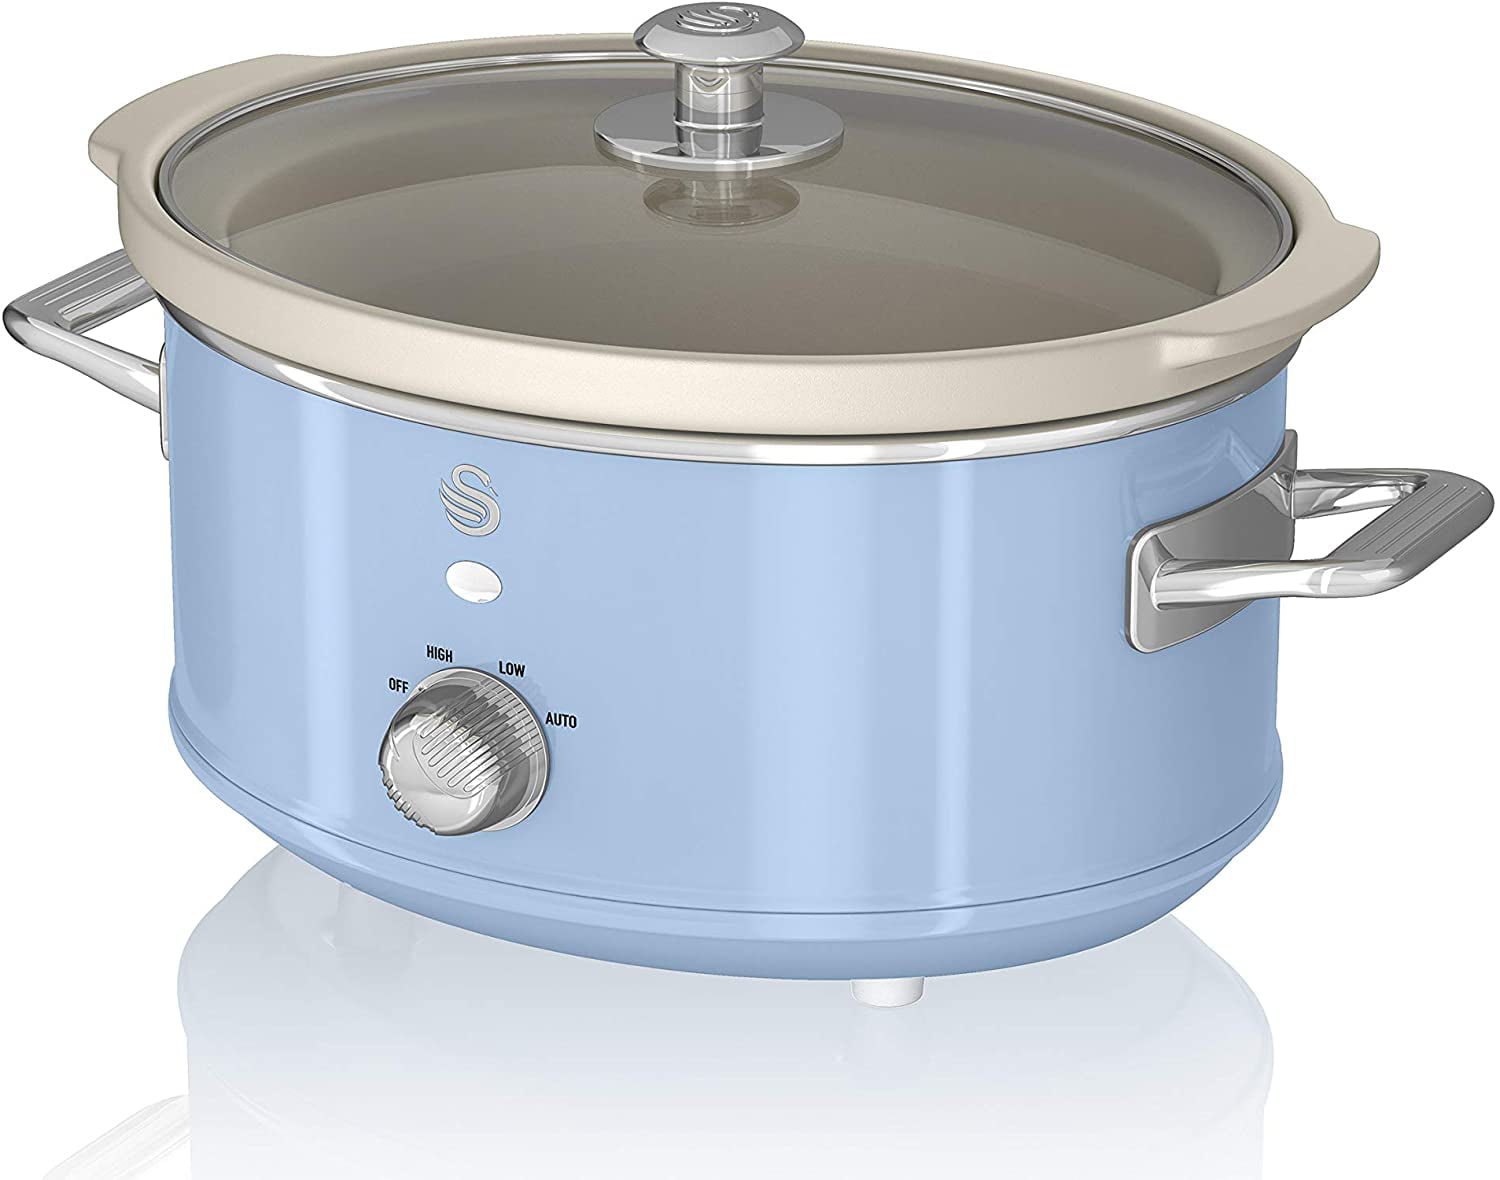 Free shipping Pip Brand Stainless Steel 3.5L Slow Cooker Great For the Holidays 